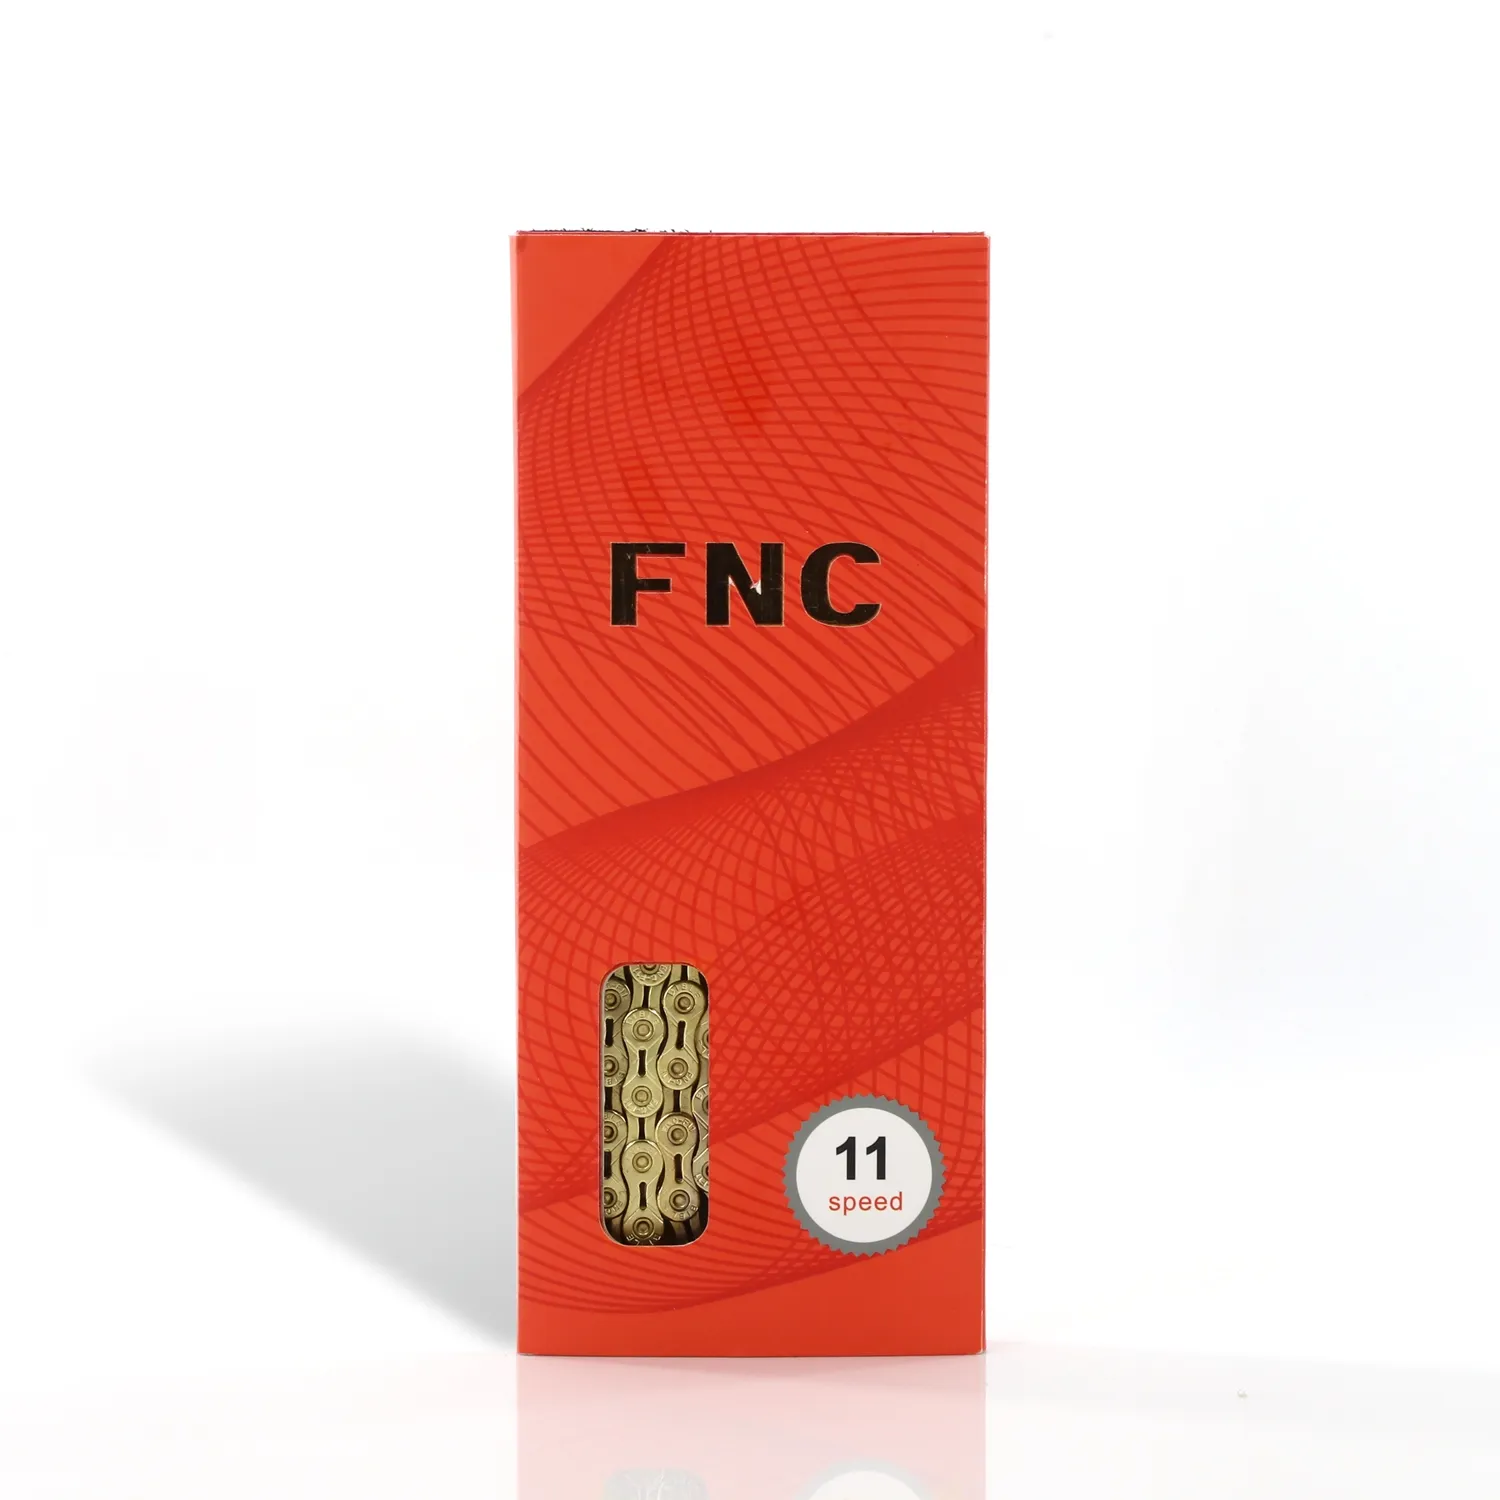 High quality FNC 11 speed golden antirust stainless steel half hollow road mountain bike bicycle chain